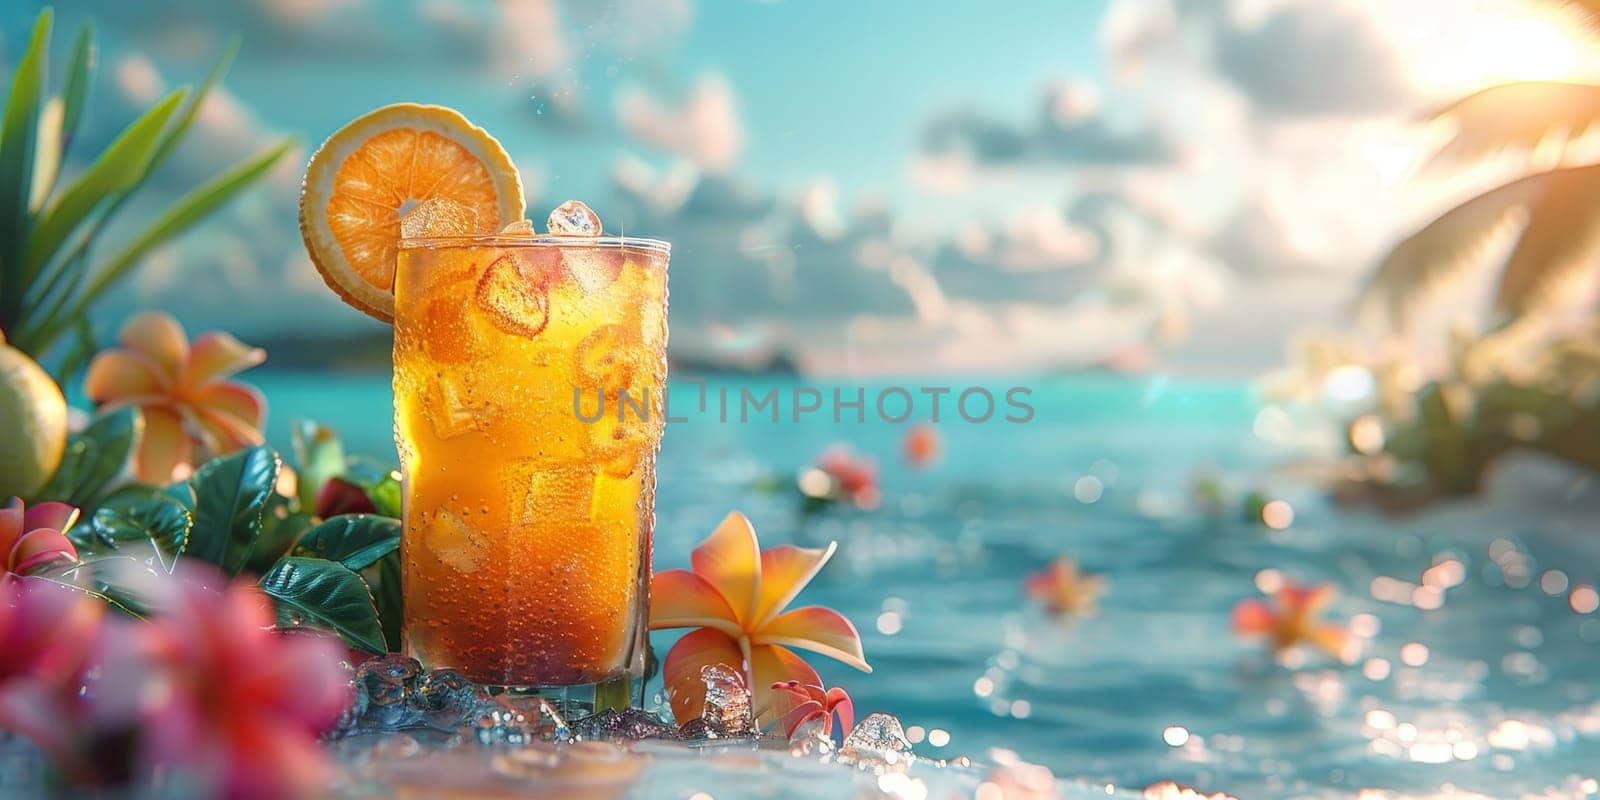 A glass of iced tea is on a table next to a body of water. The image has a tropical vibe, with a beach setting and a drink that is perfect for a hot day